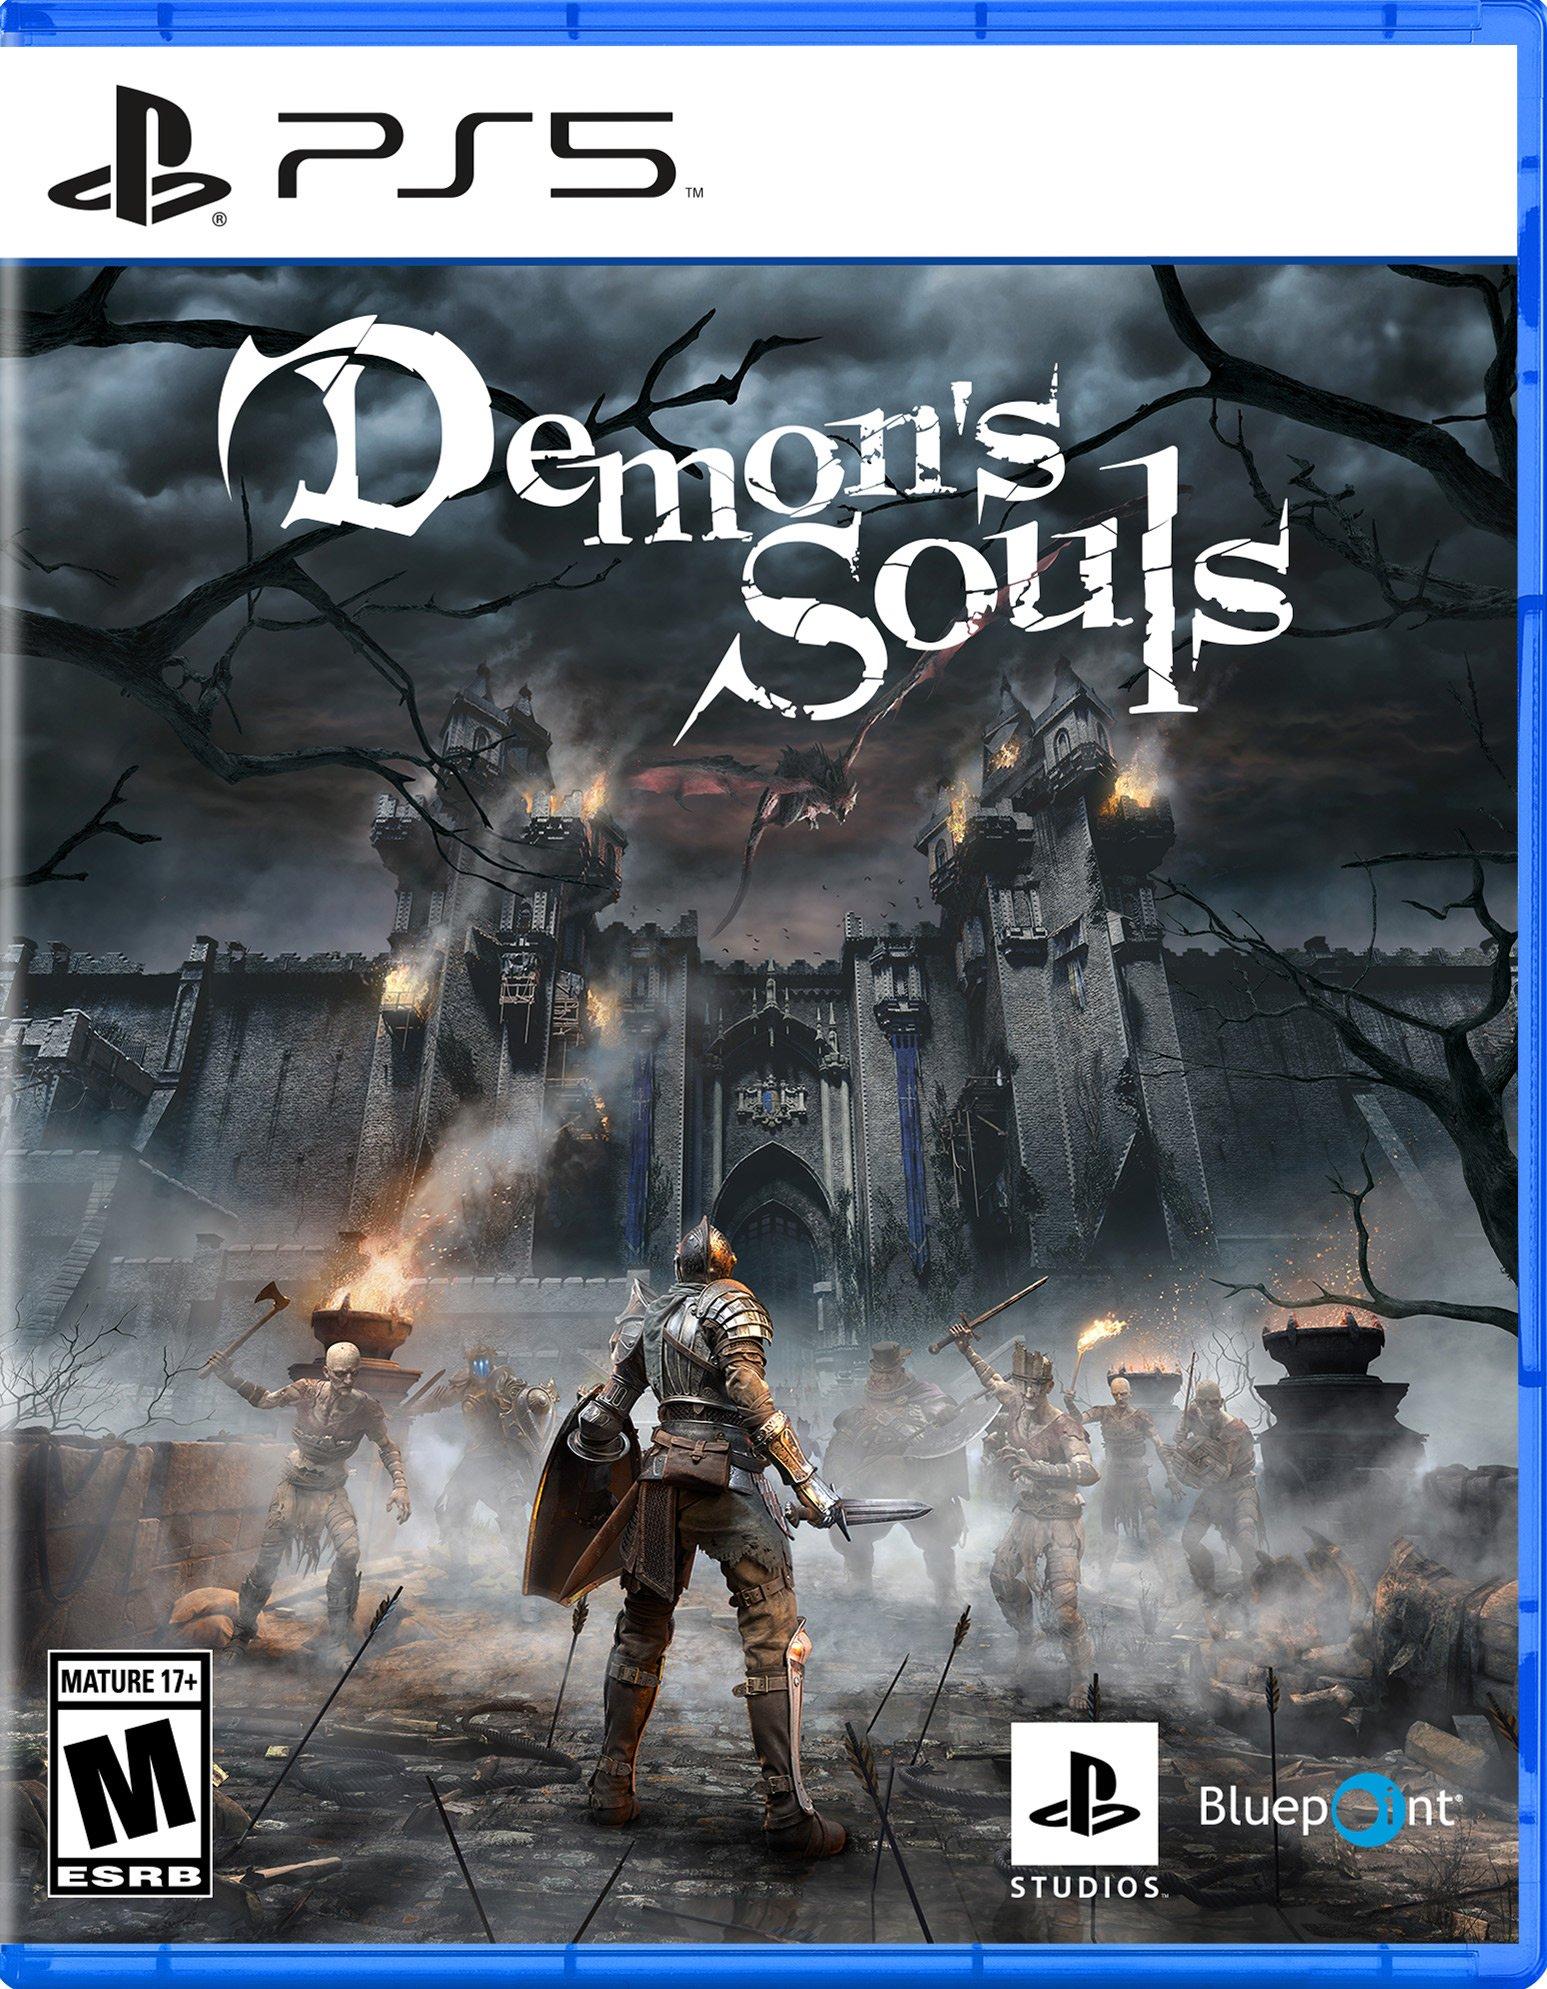 Spaceship bent Extensively Demon's Souls - PlayStation 5